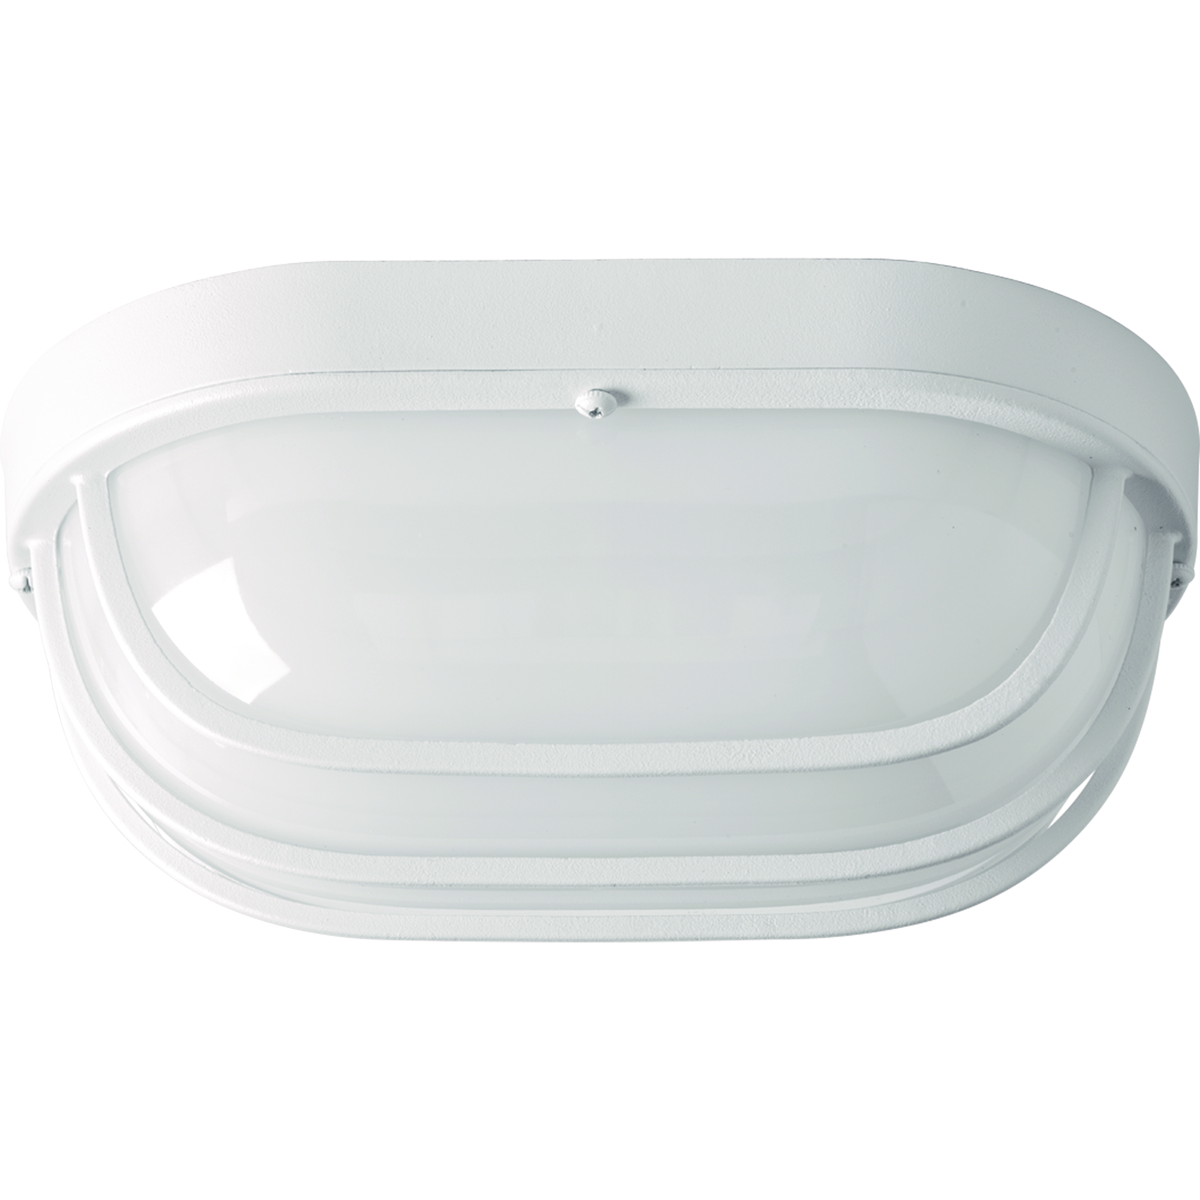 One-Light 10-1/2 in LED Wall or Ceiling Bulkhead. General purpose LED luminaire comprised of a die-cast aluminum frame and polycarbonate diffuser. Fixtures are impact resistant and can be mounted on wall or ceiling. Replaceable LED module. White finish.